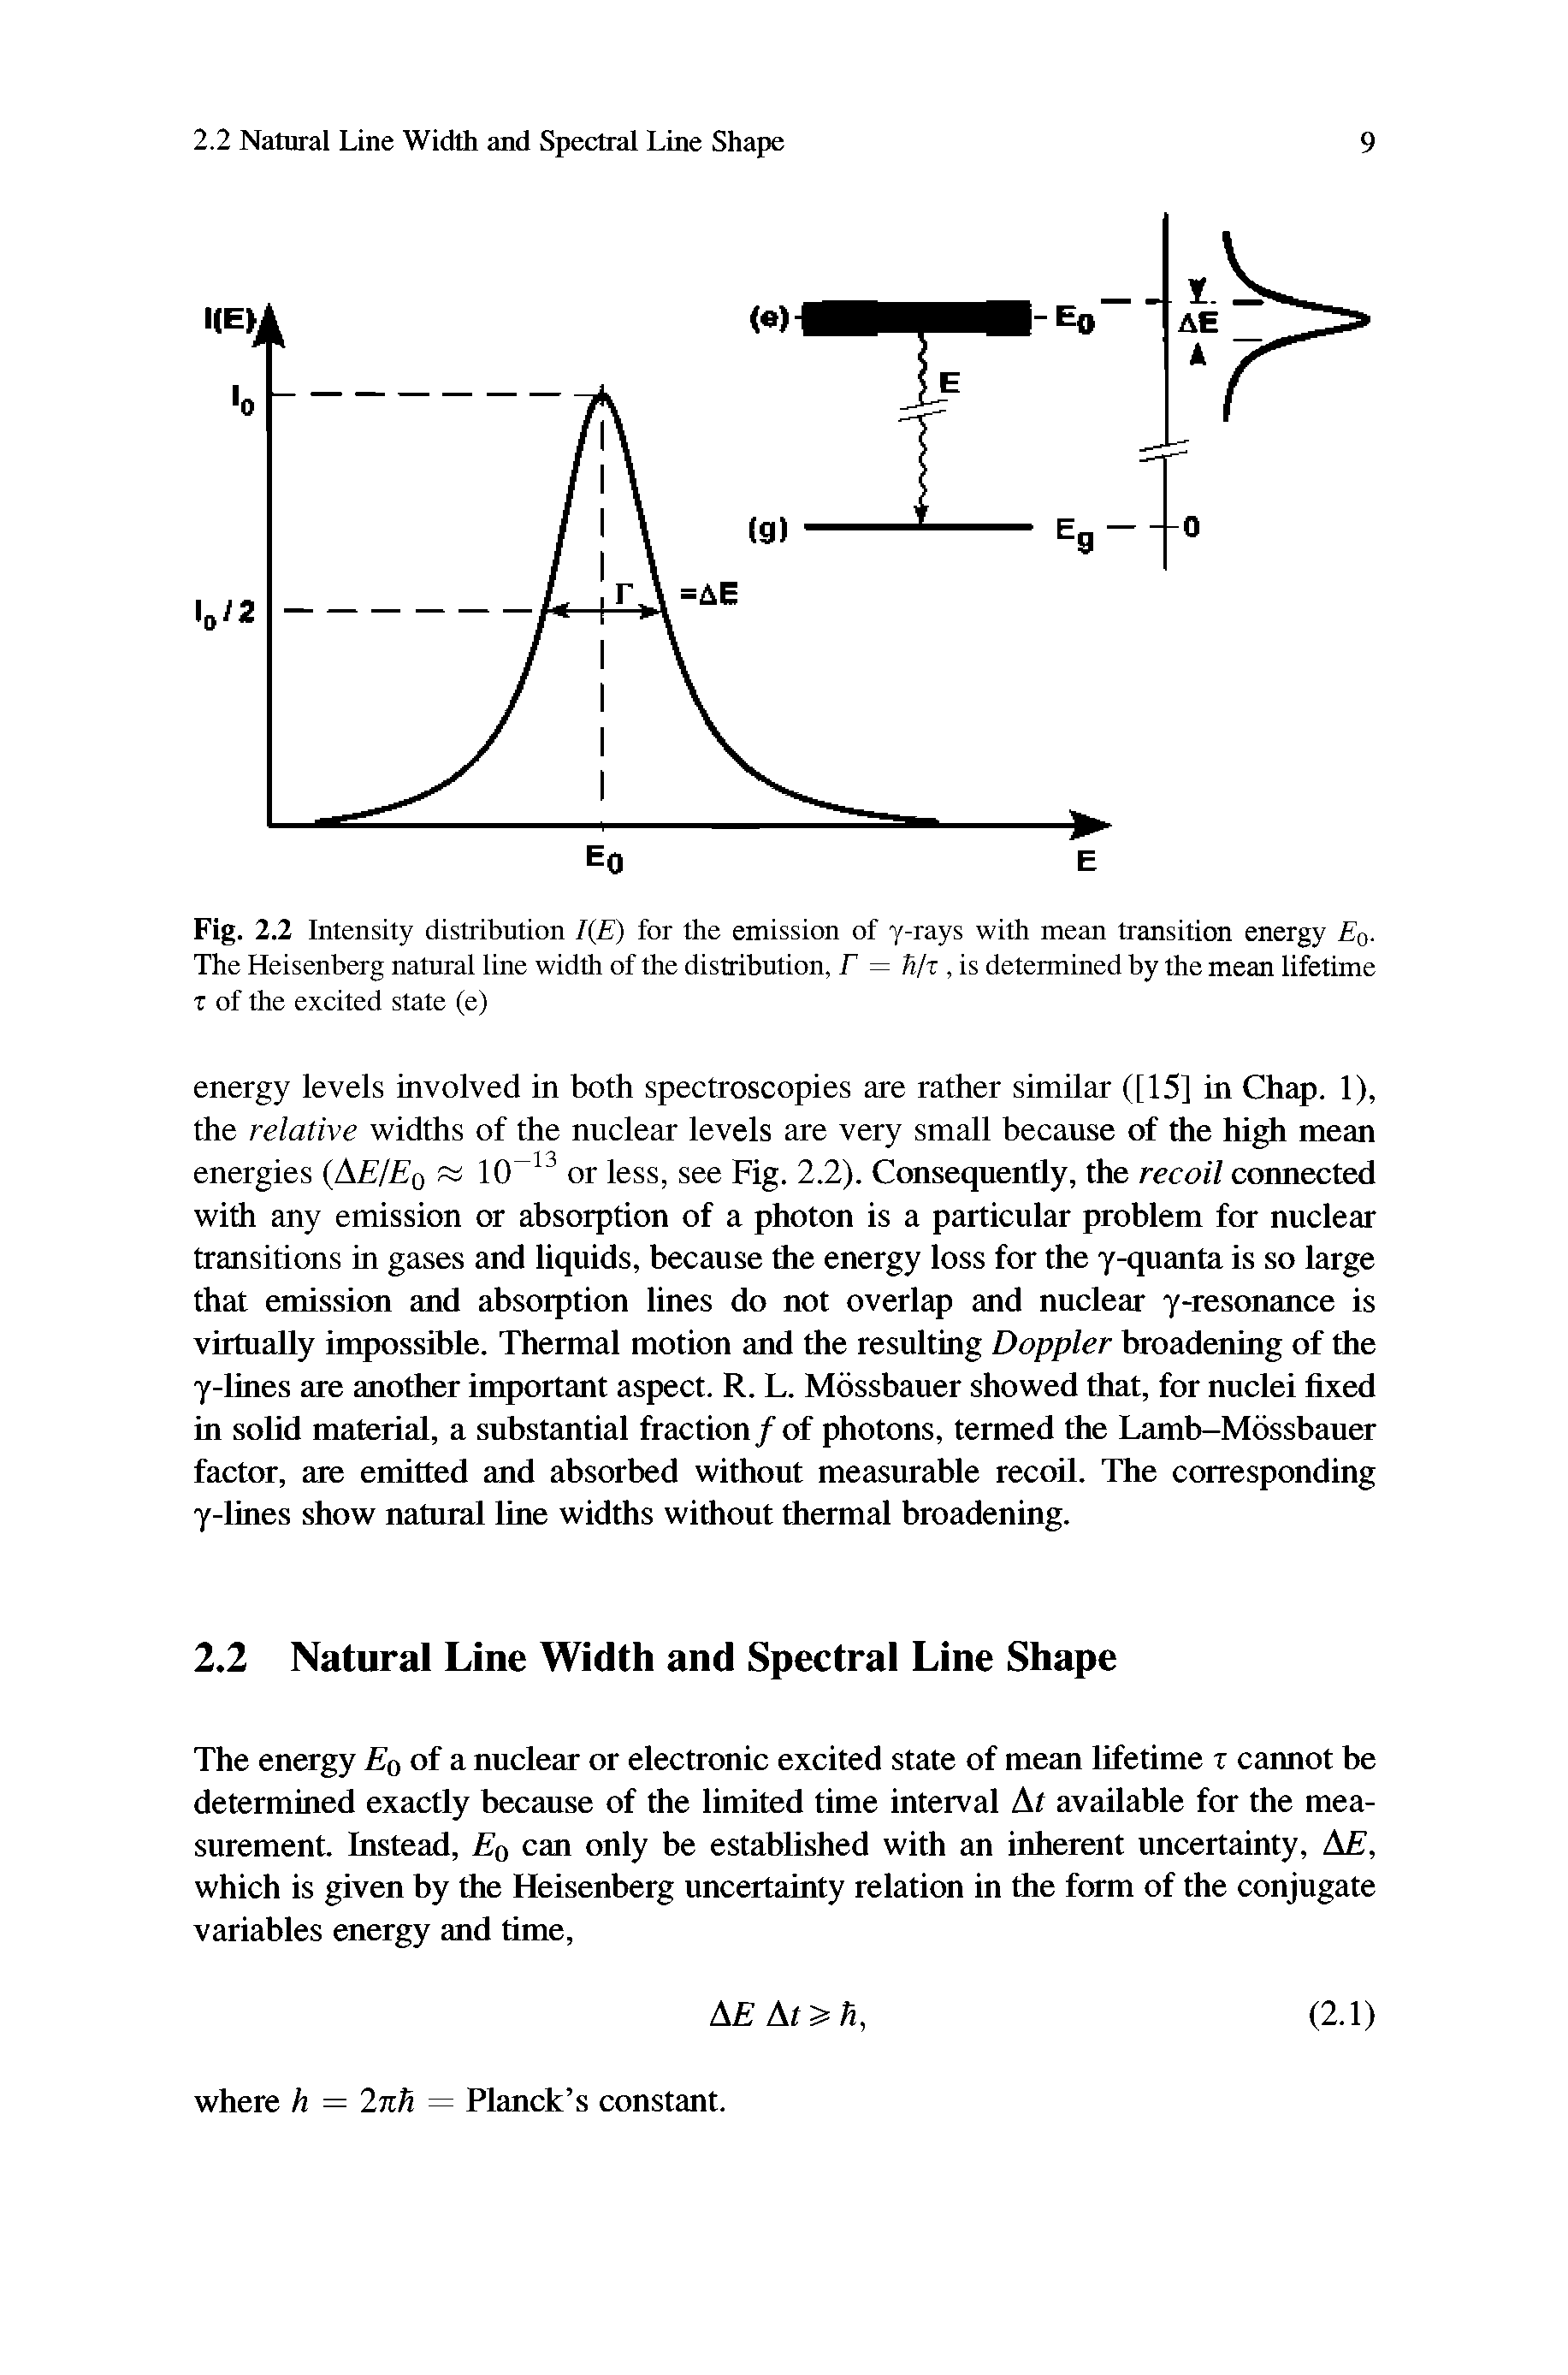 Fig. 2.2 Intensity distribution /( ) for the emission of y-rays with mean transition energy Eq. The Heisenberg natural line width of the distribution, F = S/t, is determined by the mean lifetime T of the excited state (e)...